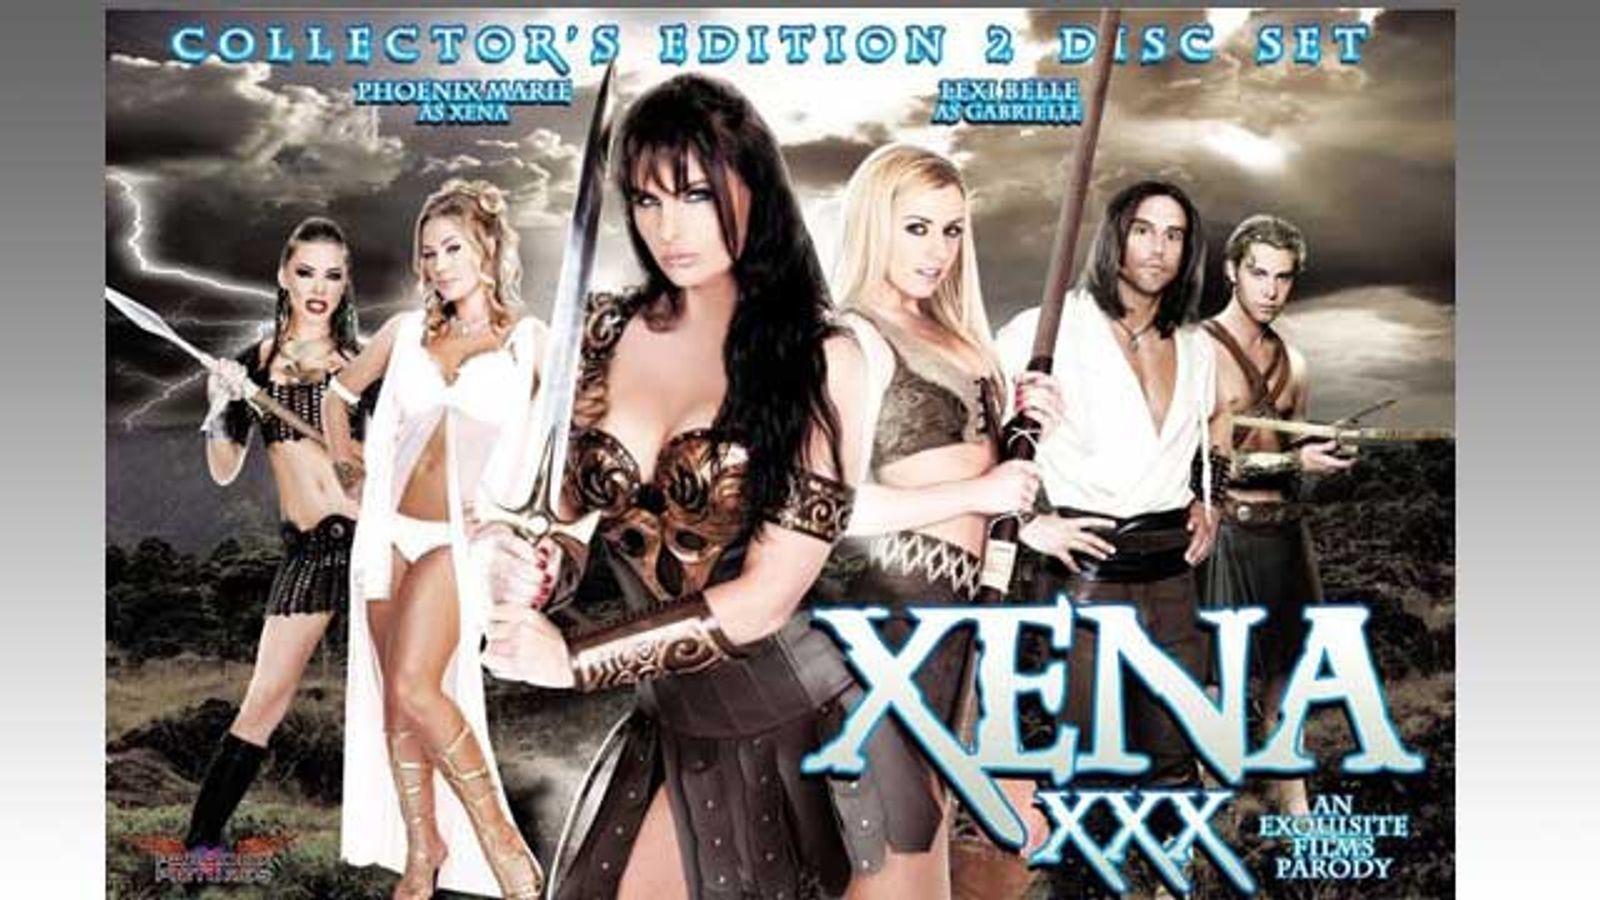 'Xena XXX: An Exquisite Films Parody' Is Now Shipping